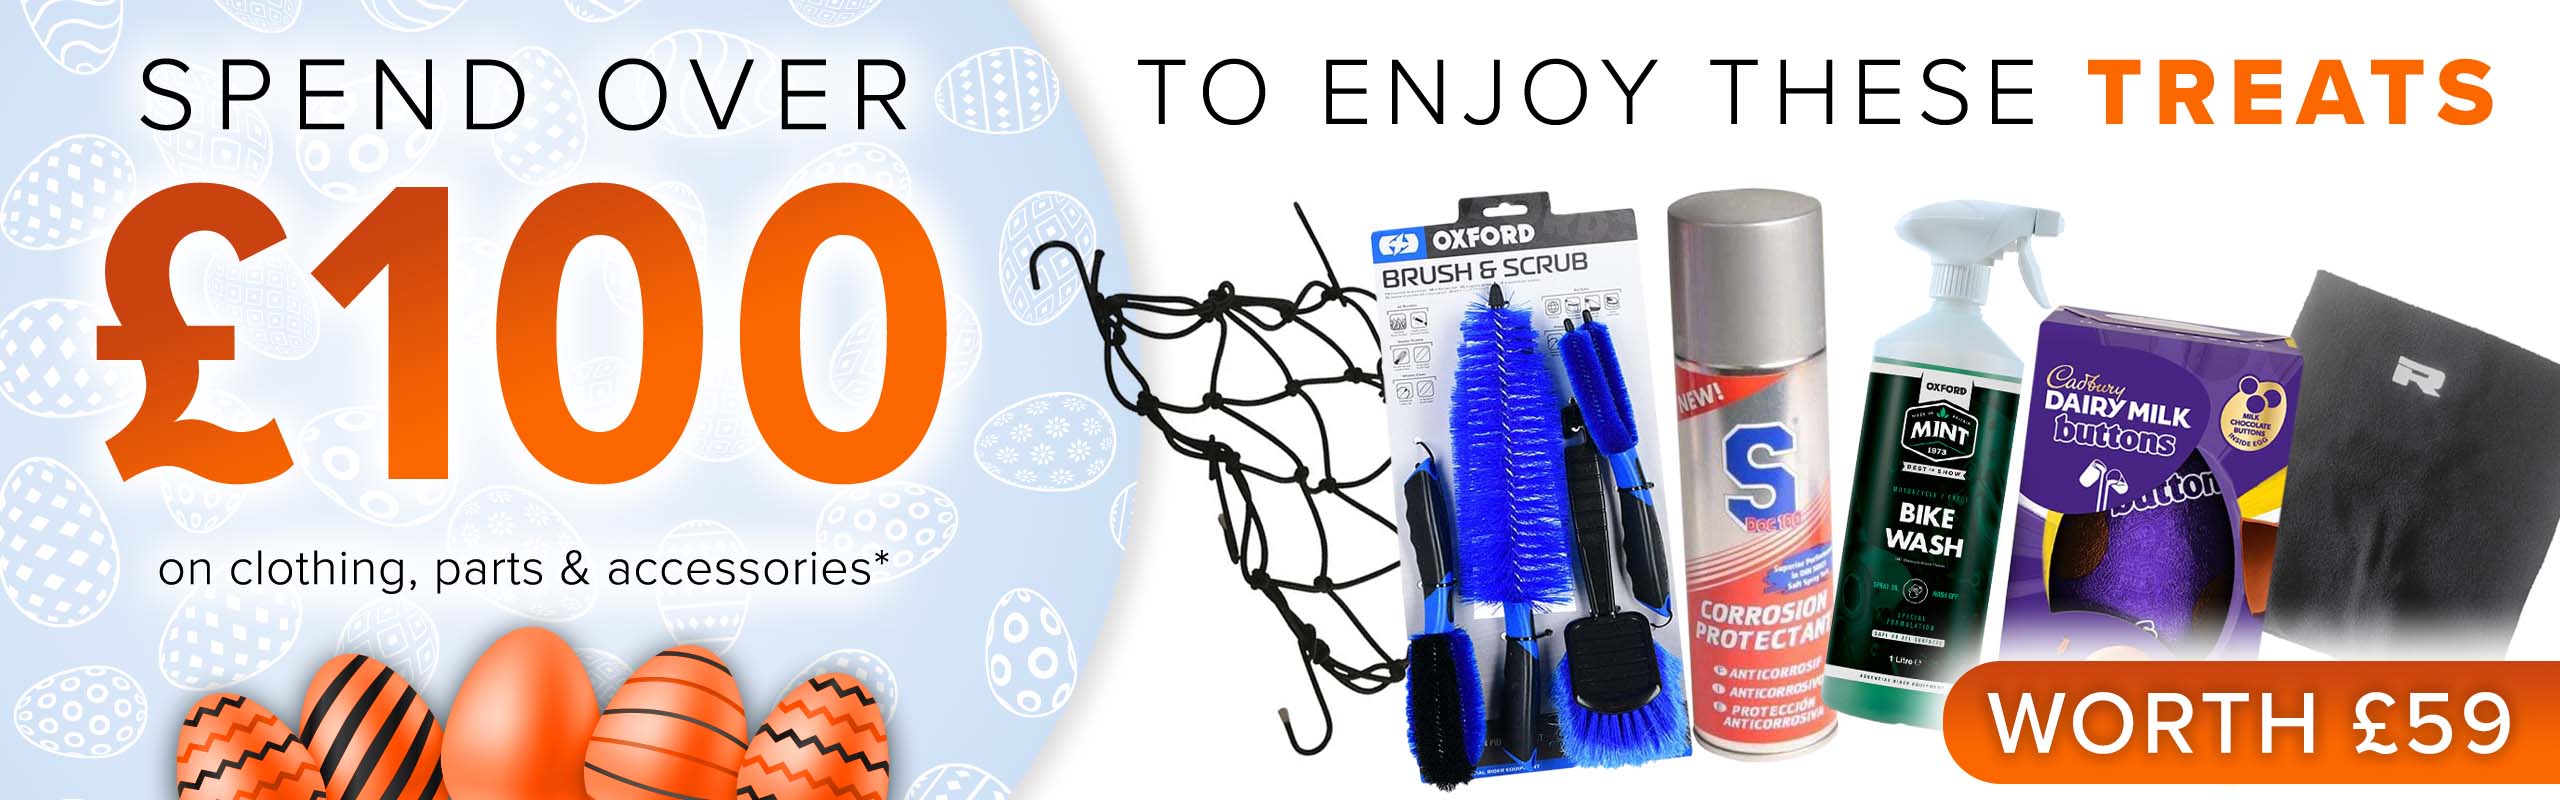 SPEND OVER £100 on clothing, parts and accessories and get THESE (An Easter egg, S Doc 100 Corrosion Protectant, and Mint Bike Wash (1l), a Richa Fleece Neck Warmer, a Luggage Cargo Net and an Oxford Brush & Scrub Set) for FREE! (Products worth £59)